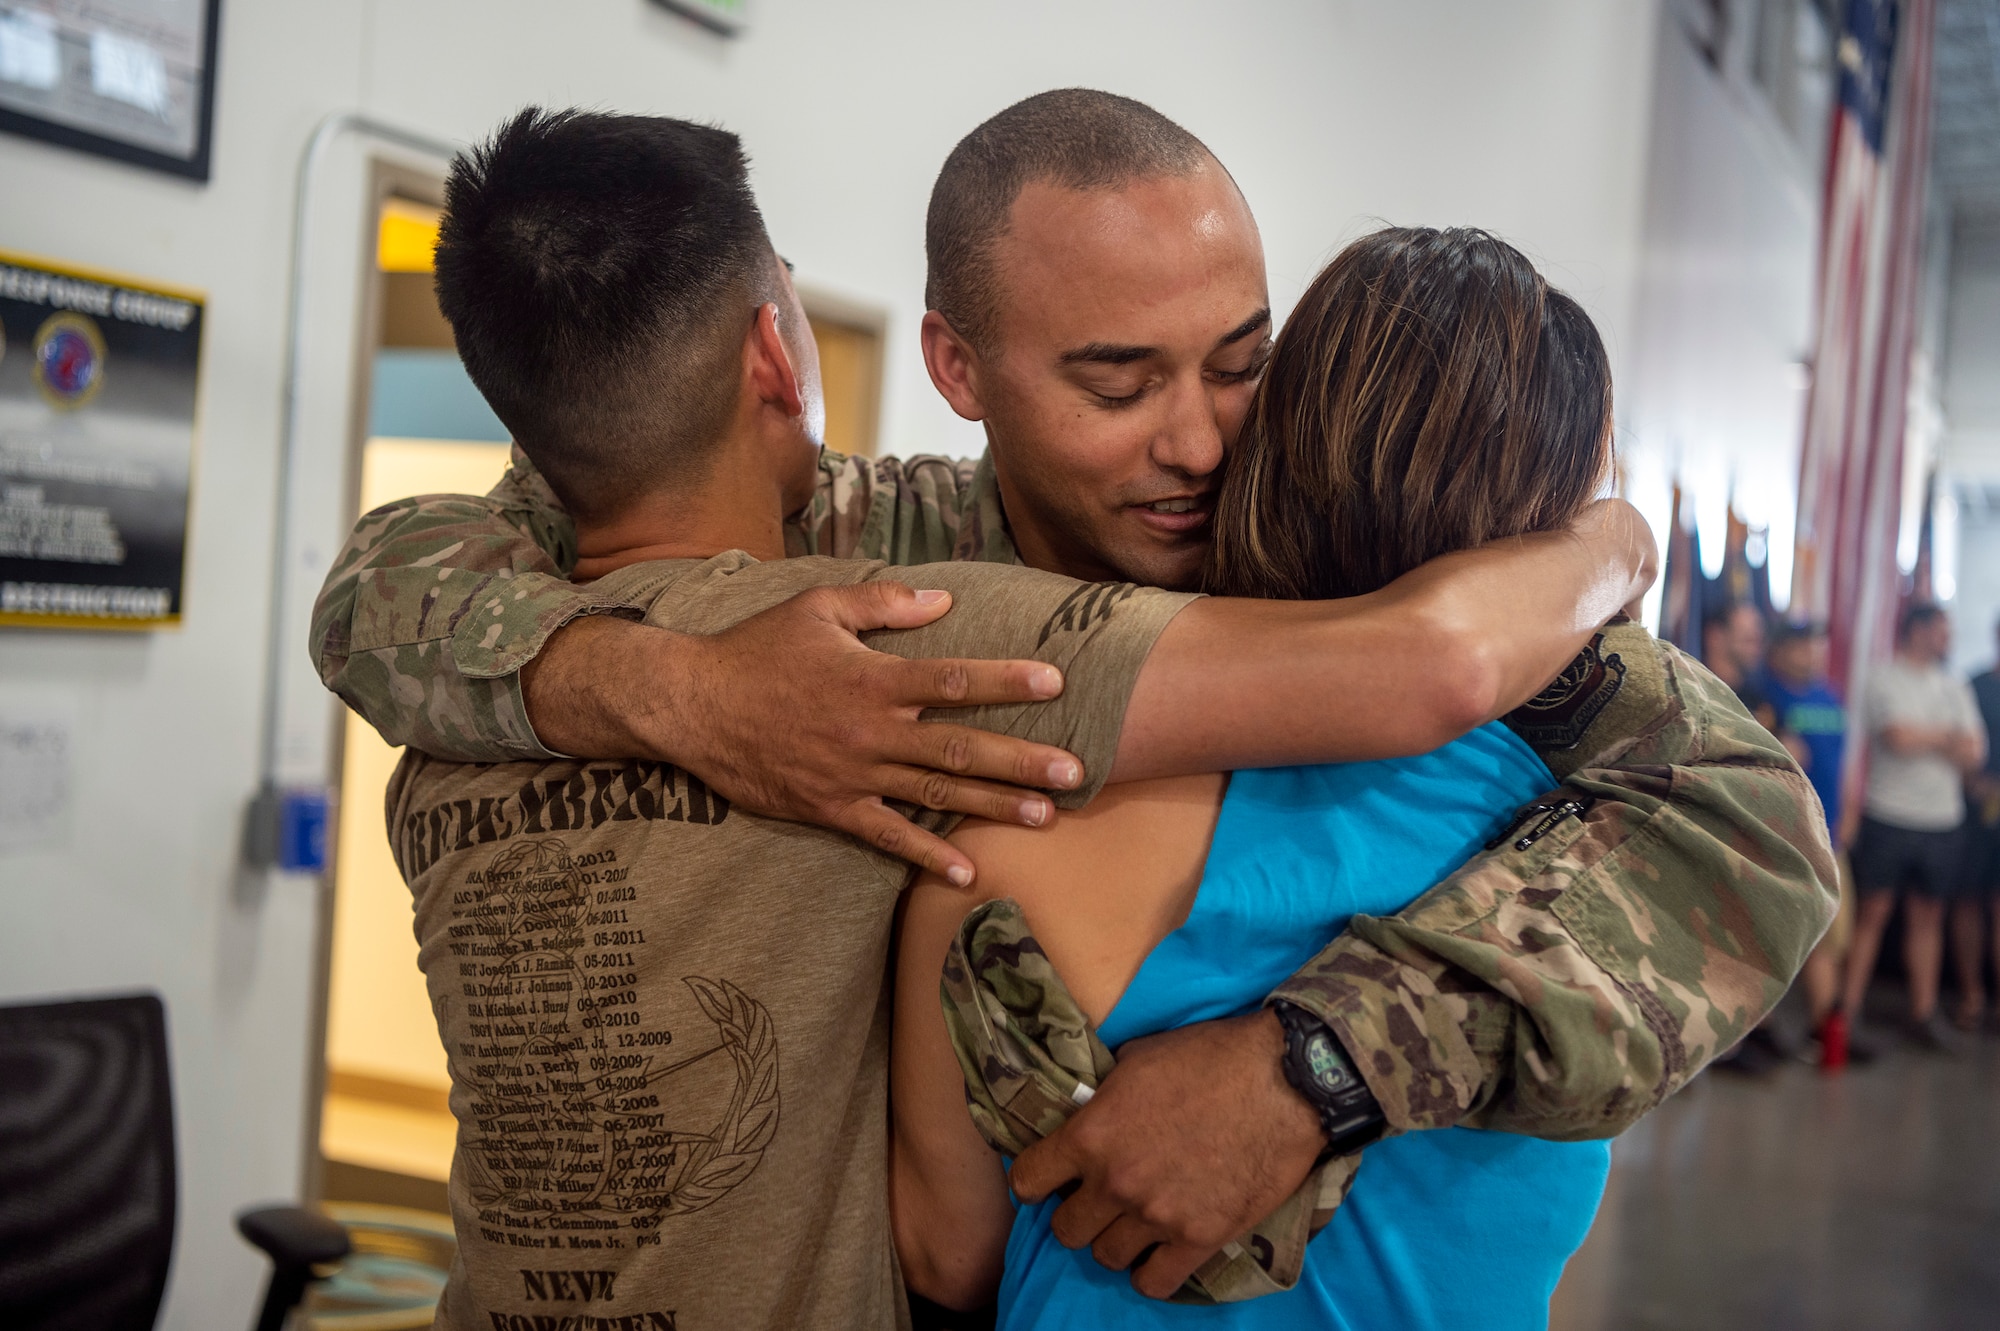 Senior Airman Laurence Pierre, 921st Contingency Response Squadron defender, hugs friends after arriving to the Global Reach Deployment Center June 19, 2021, at Travis Air Force Base, California. Devil Raiders supported retrograde operations in the Central Command area of responsibility as part of Task Force 74. (U.S. Air Force photo by Master Sgt. David W. Carbajal)